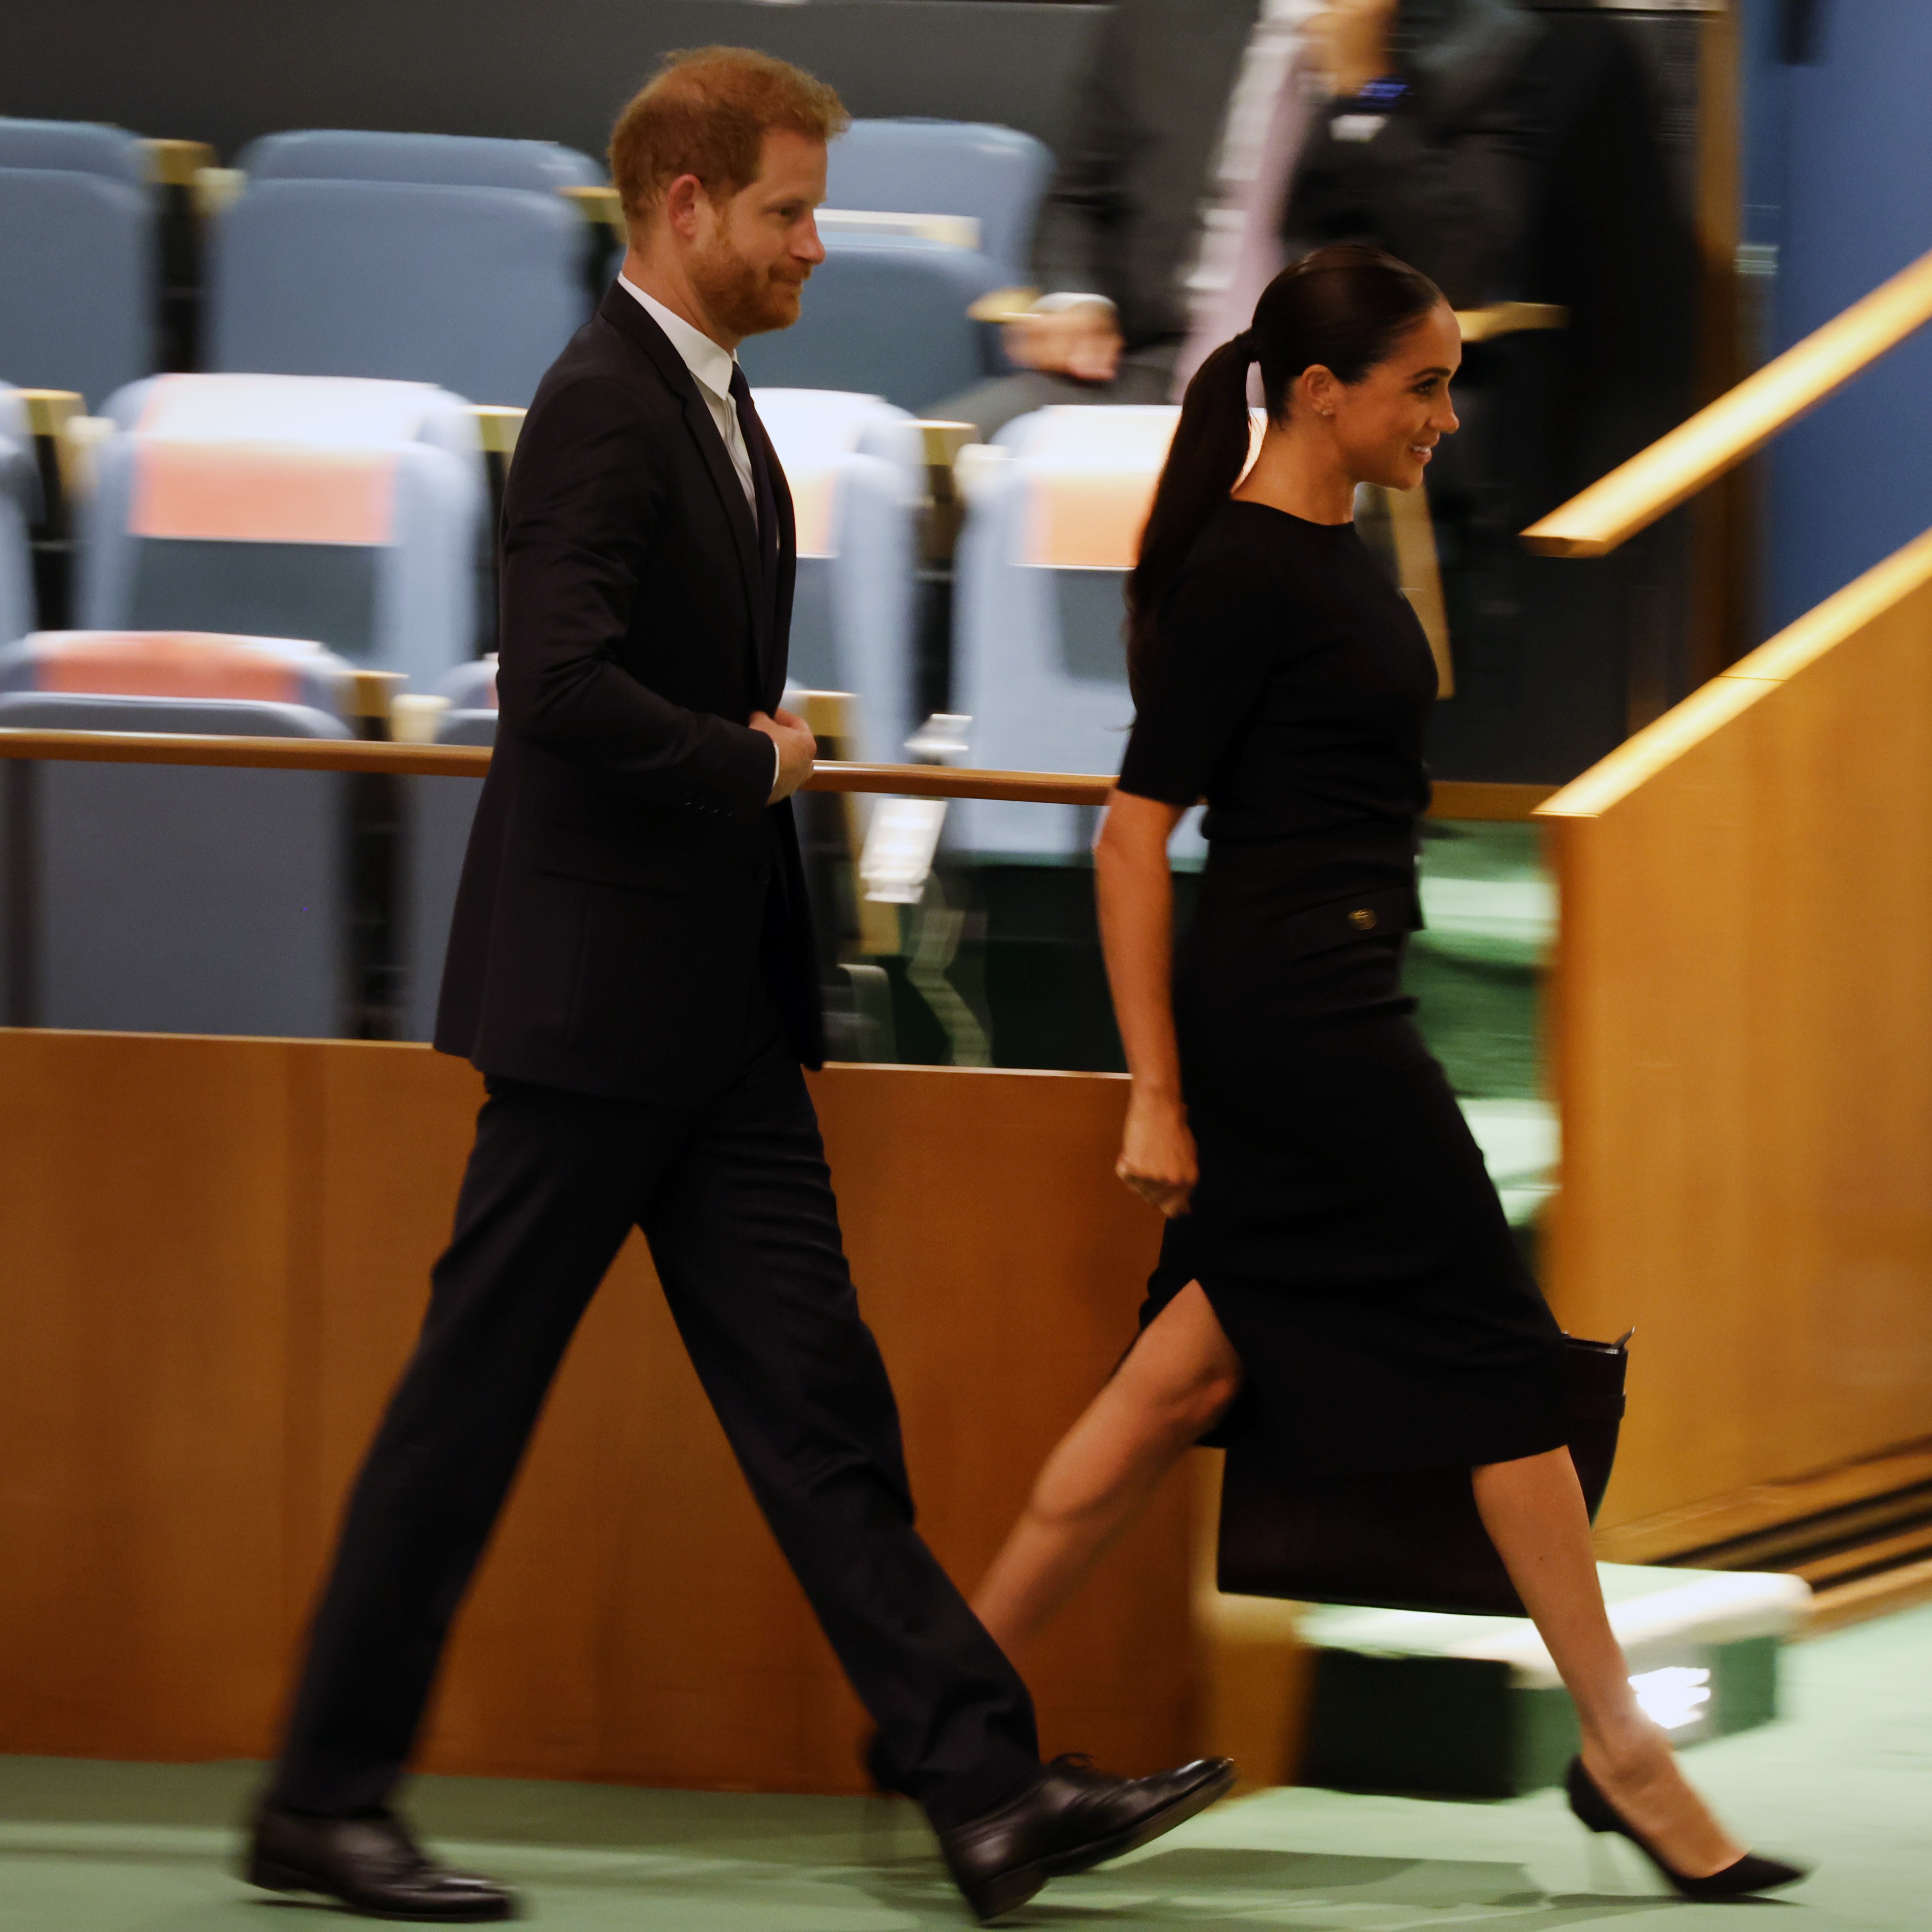 NEW YORK, NEW YORK - JULY 18: Prince Harry and his wife Meghan Markle depart after the Prince addressed the United Nations (UN) general assembly during the UN's annual celebration of Nelson Mandela International Day on July 18, 2022 in New York City. The  (Foto: Getty Images)